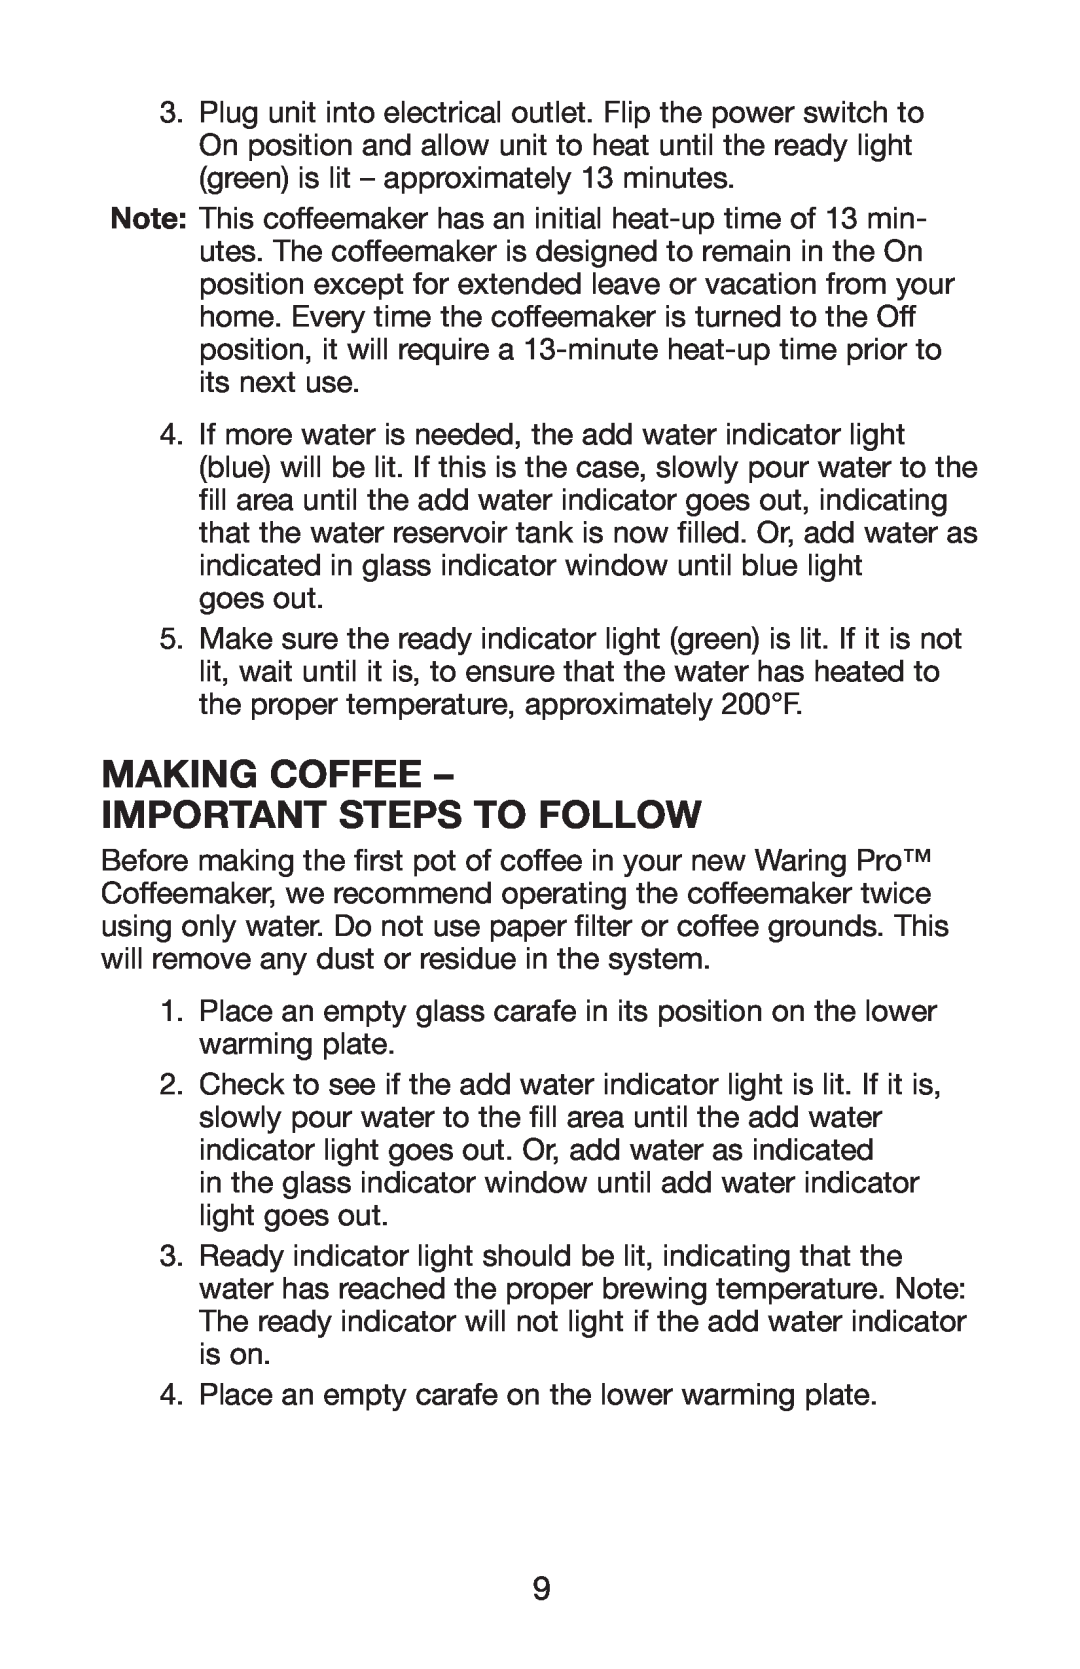 Waring WC1000 manual Making Coffee - Important Steps To Follow 